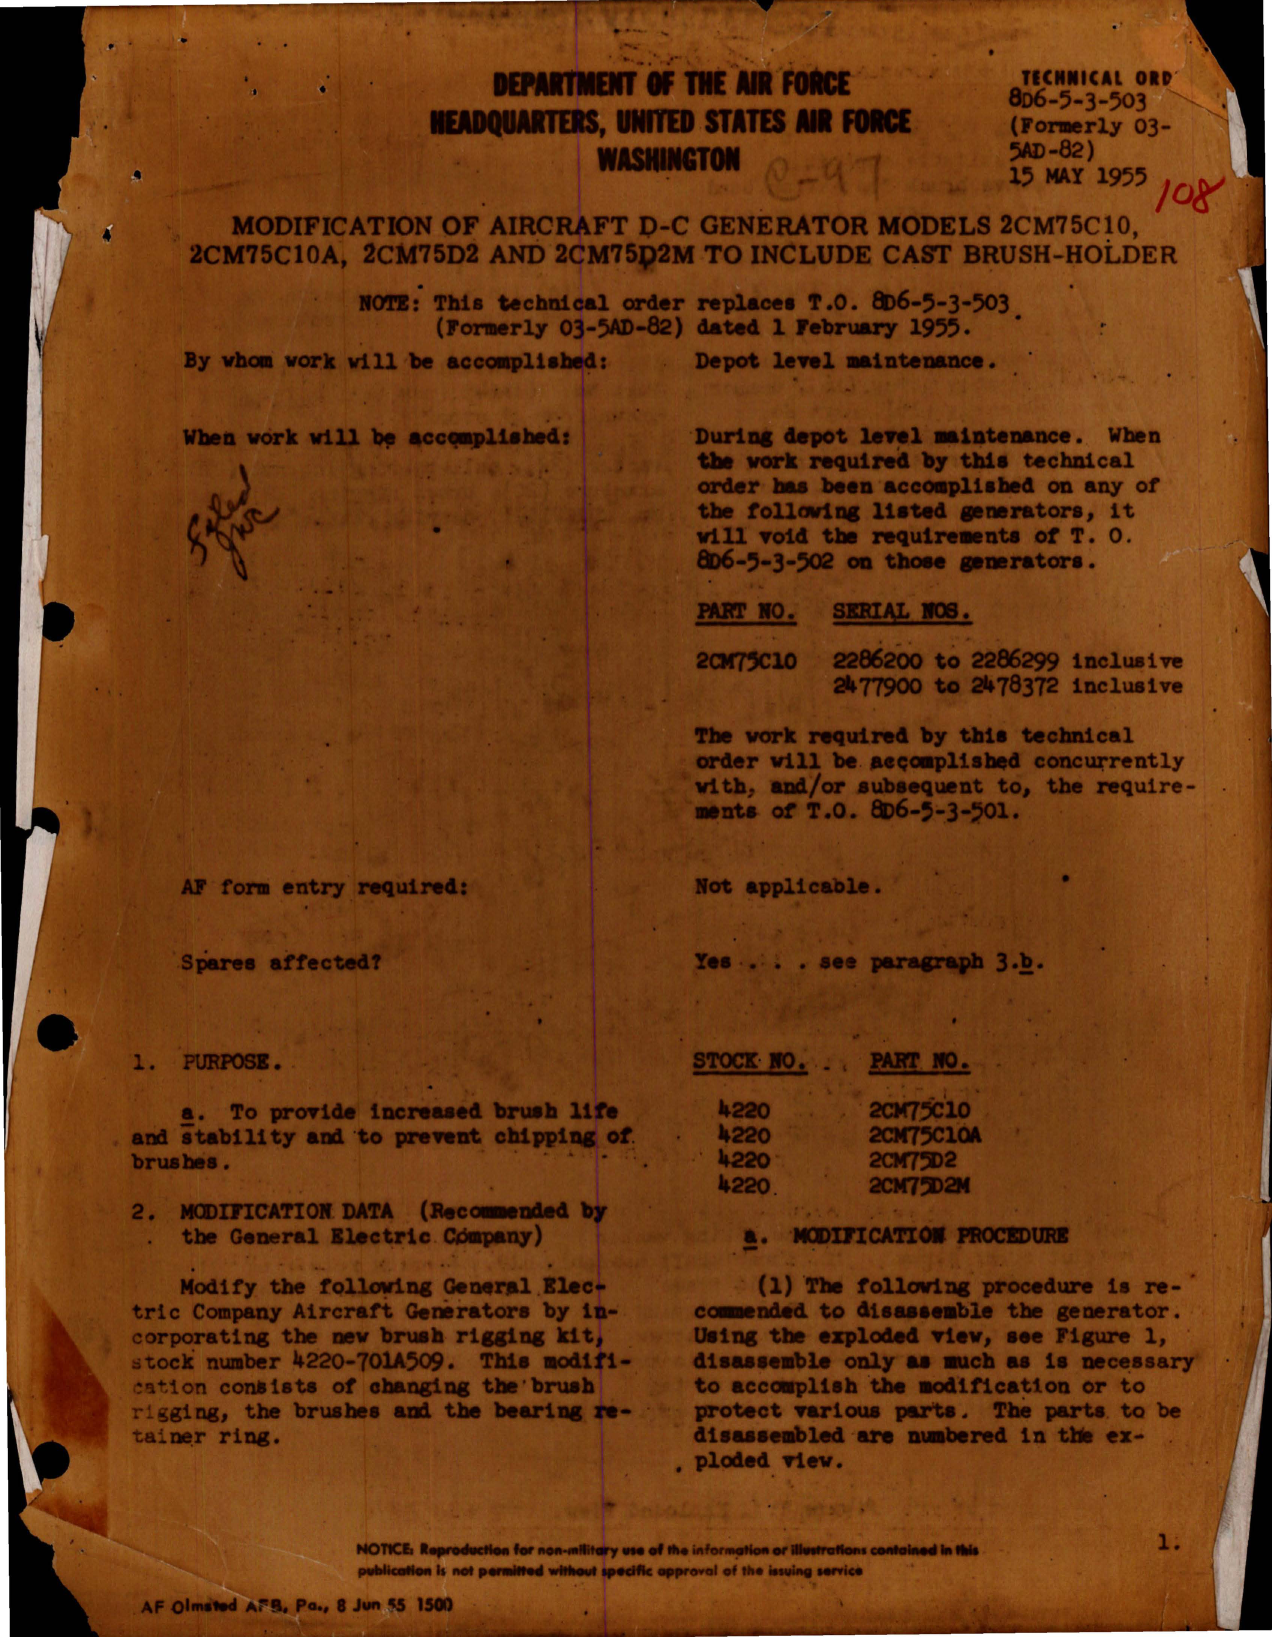 Sample page 1 from AirCorps Library document: Modification of Aircraft D-C Generator to Include Cast Brush-Holder